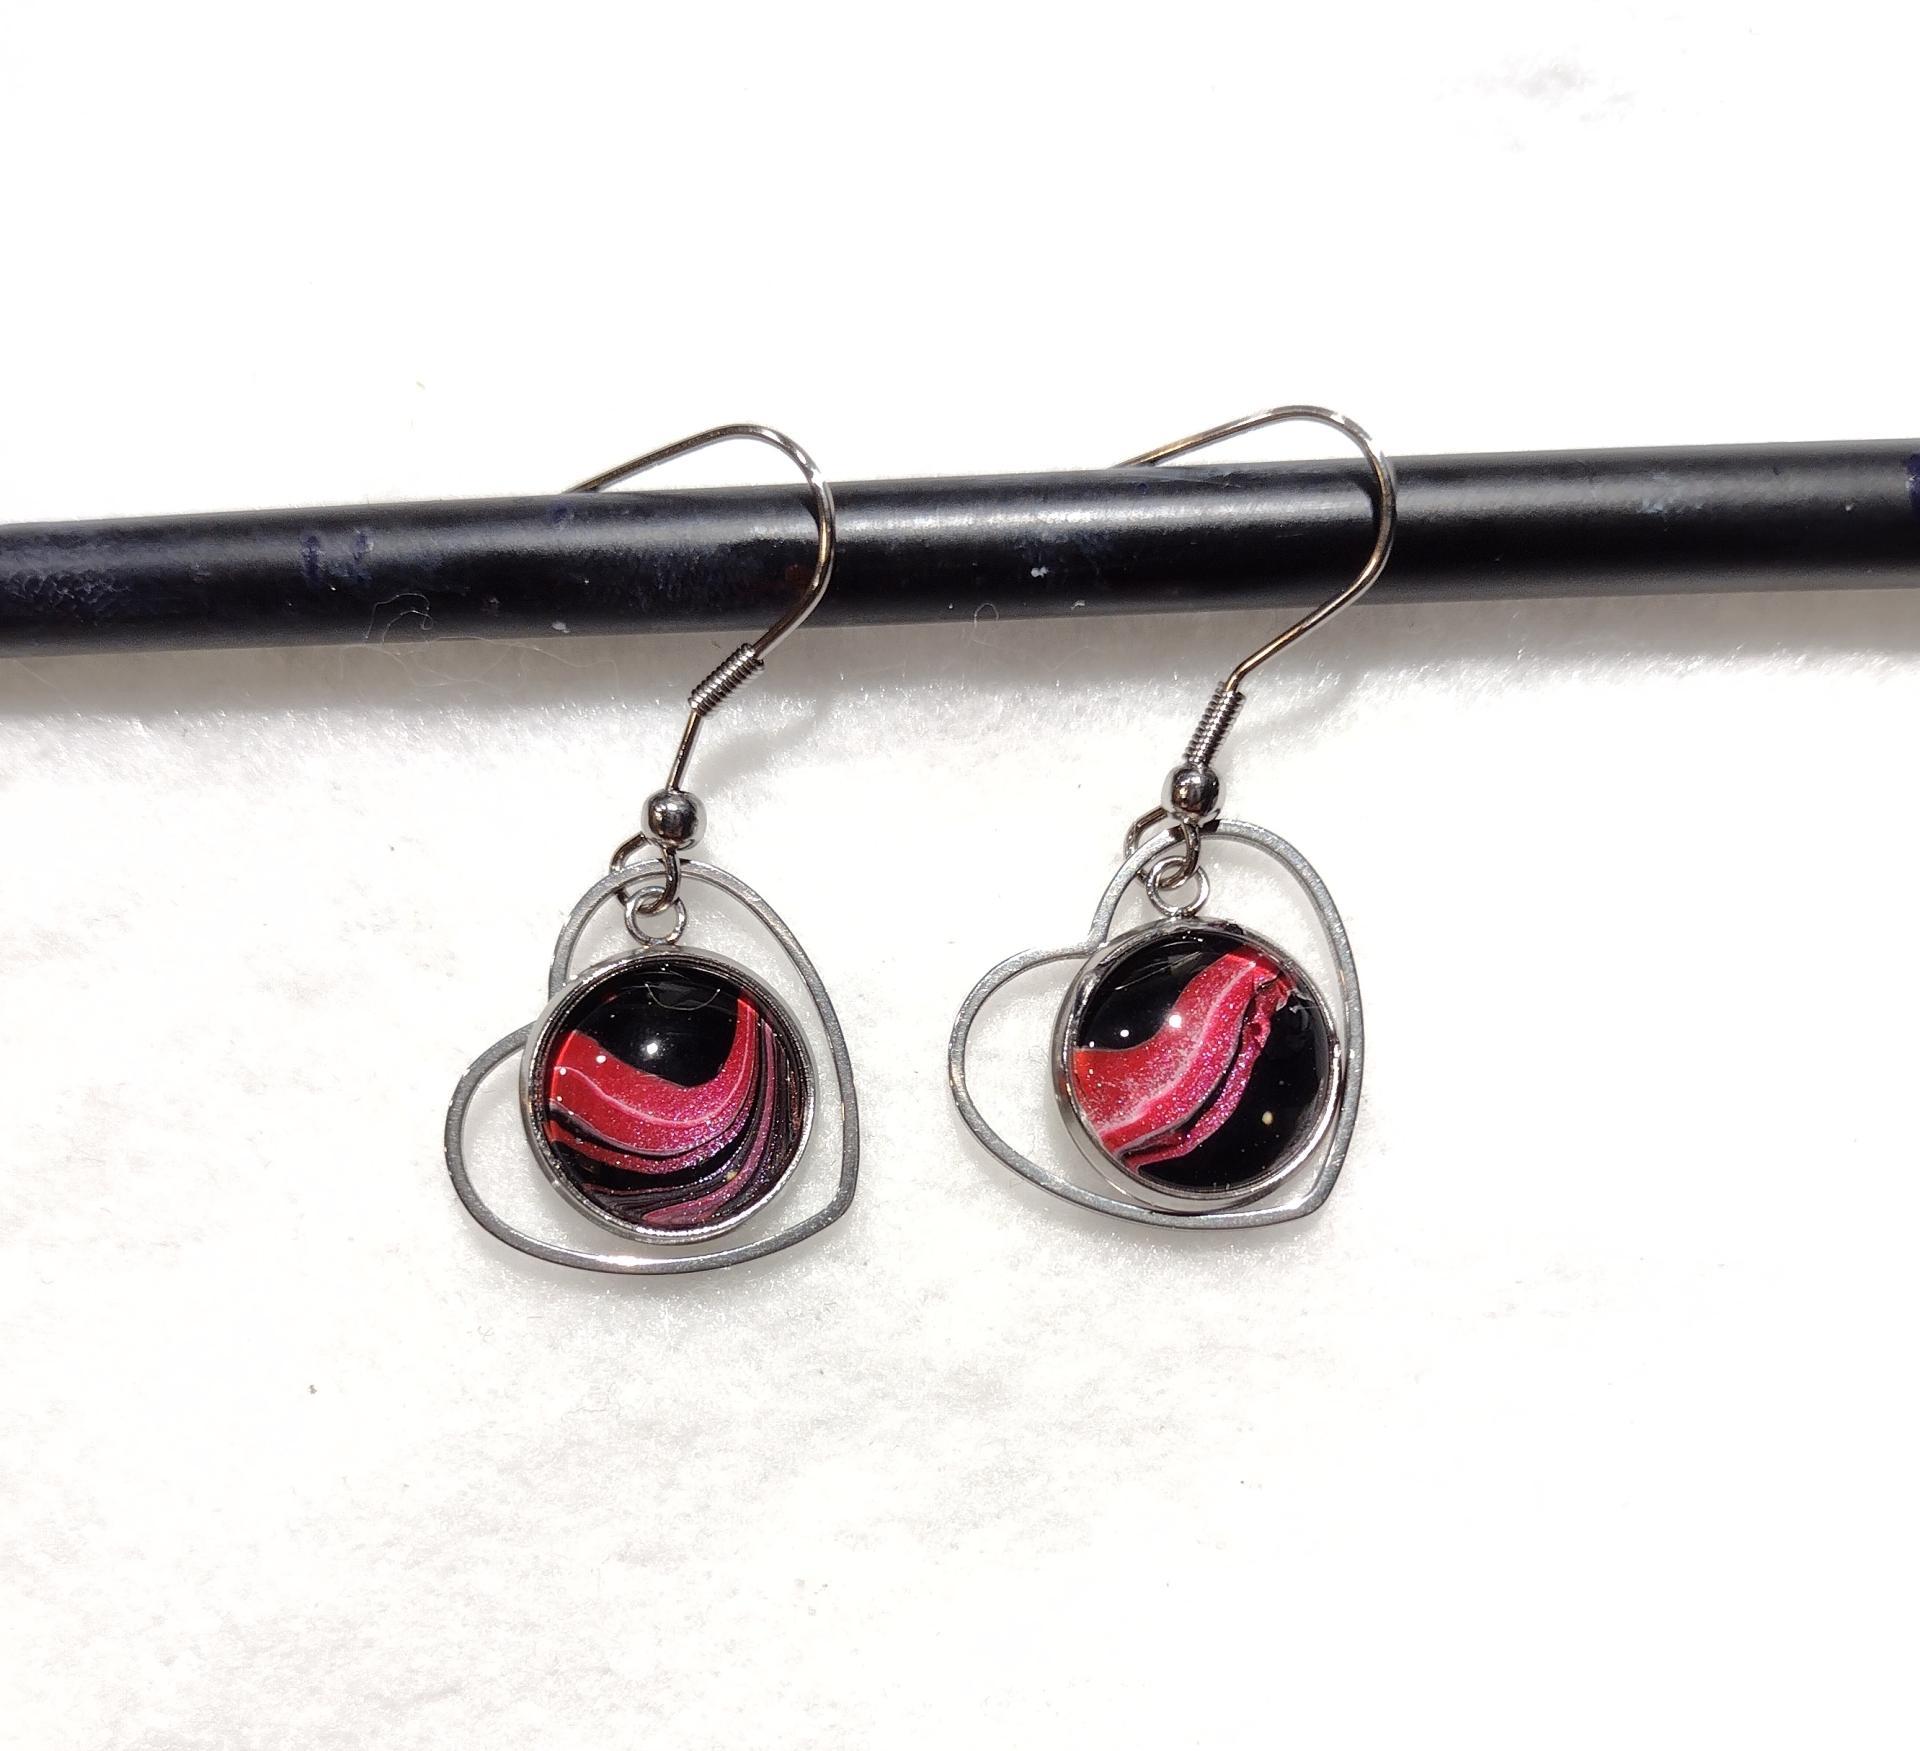 Painted Earrings, Pink and Black Hearts